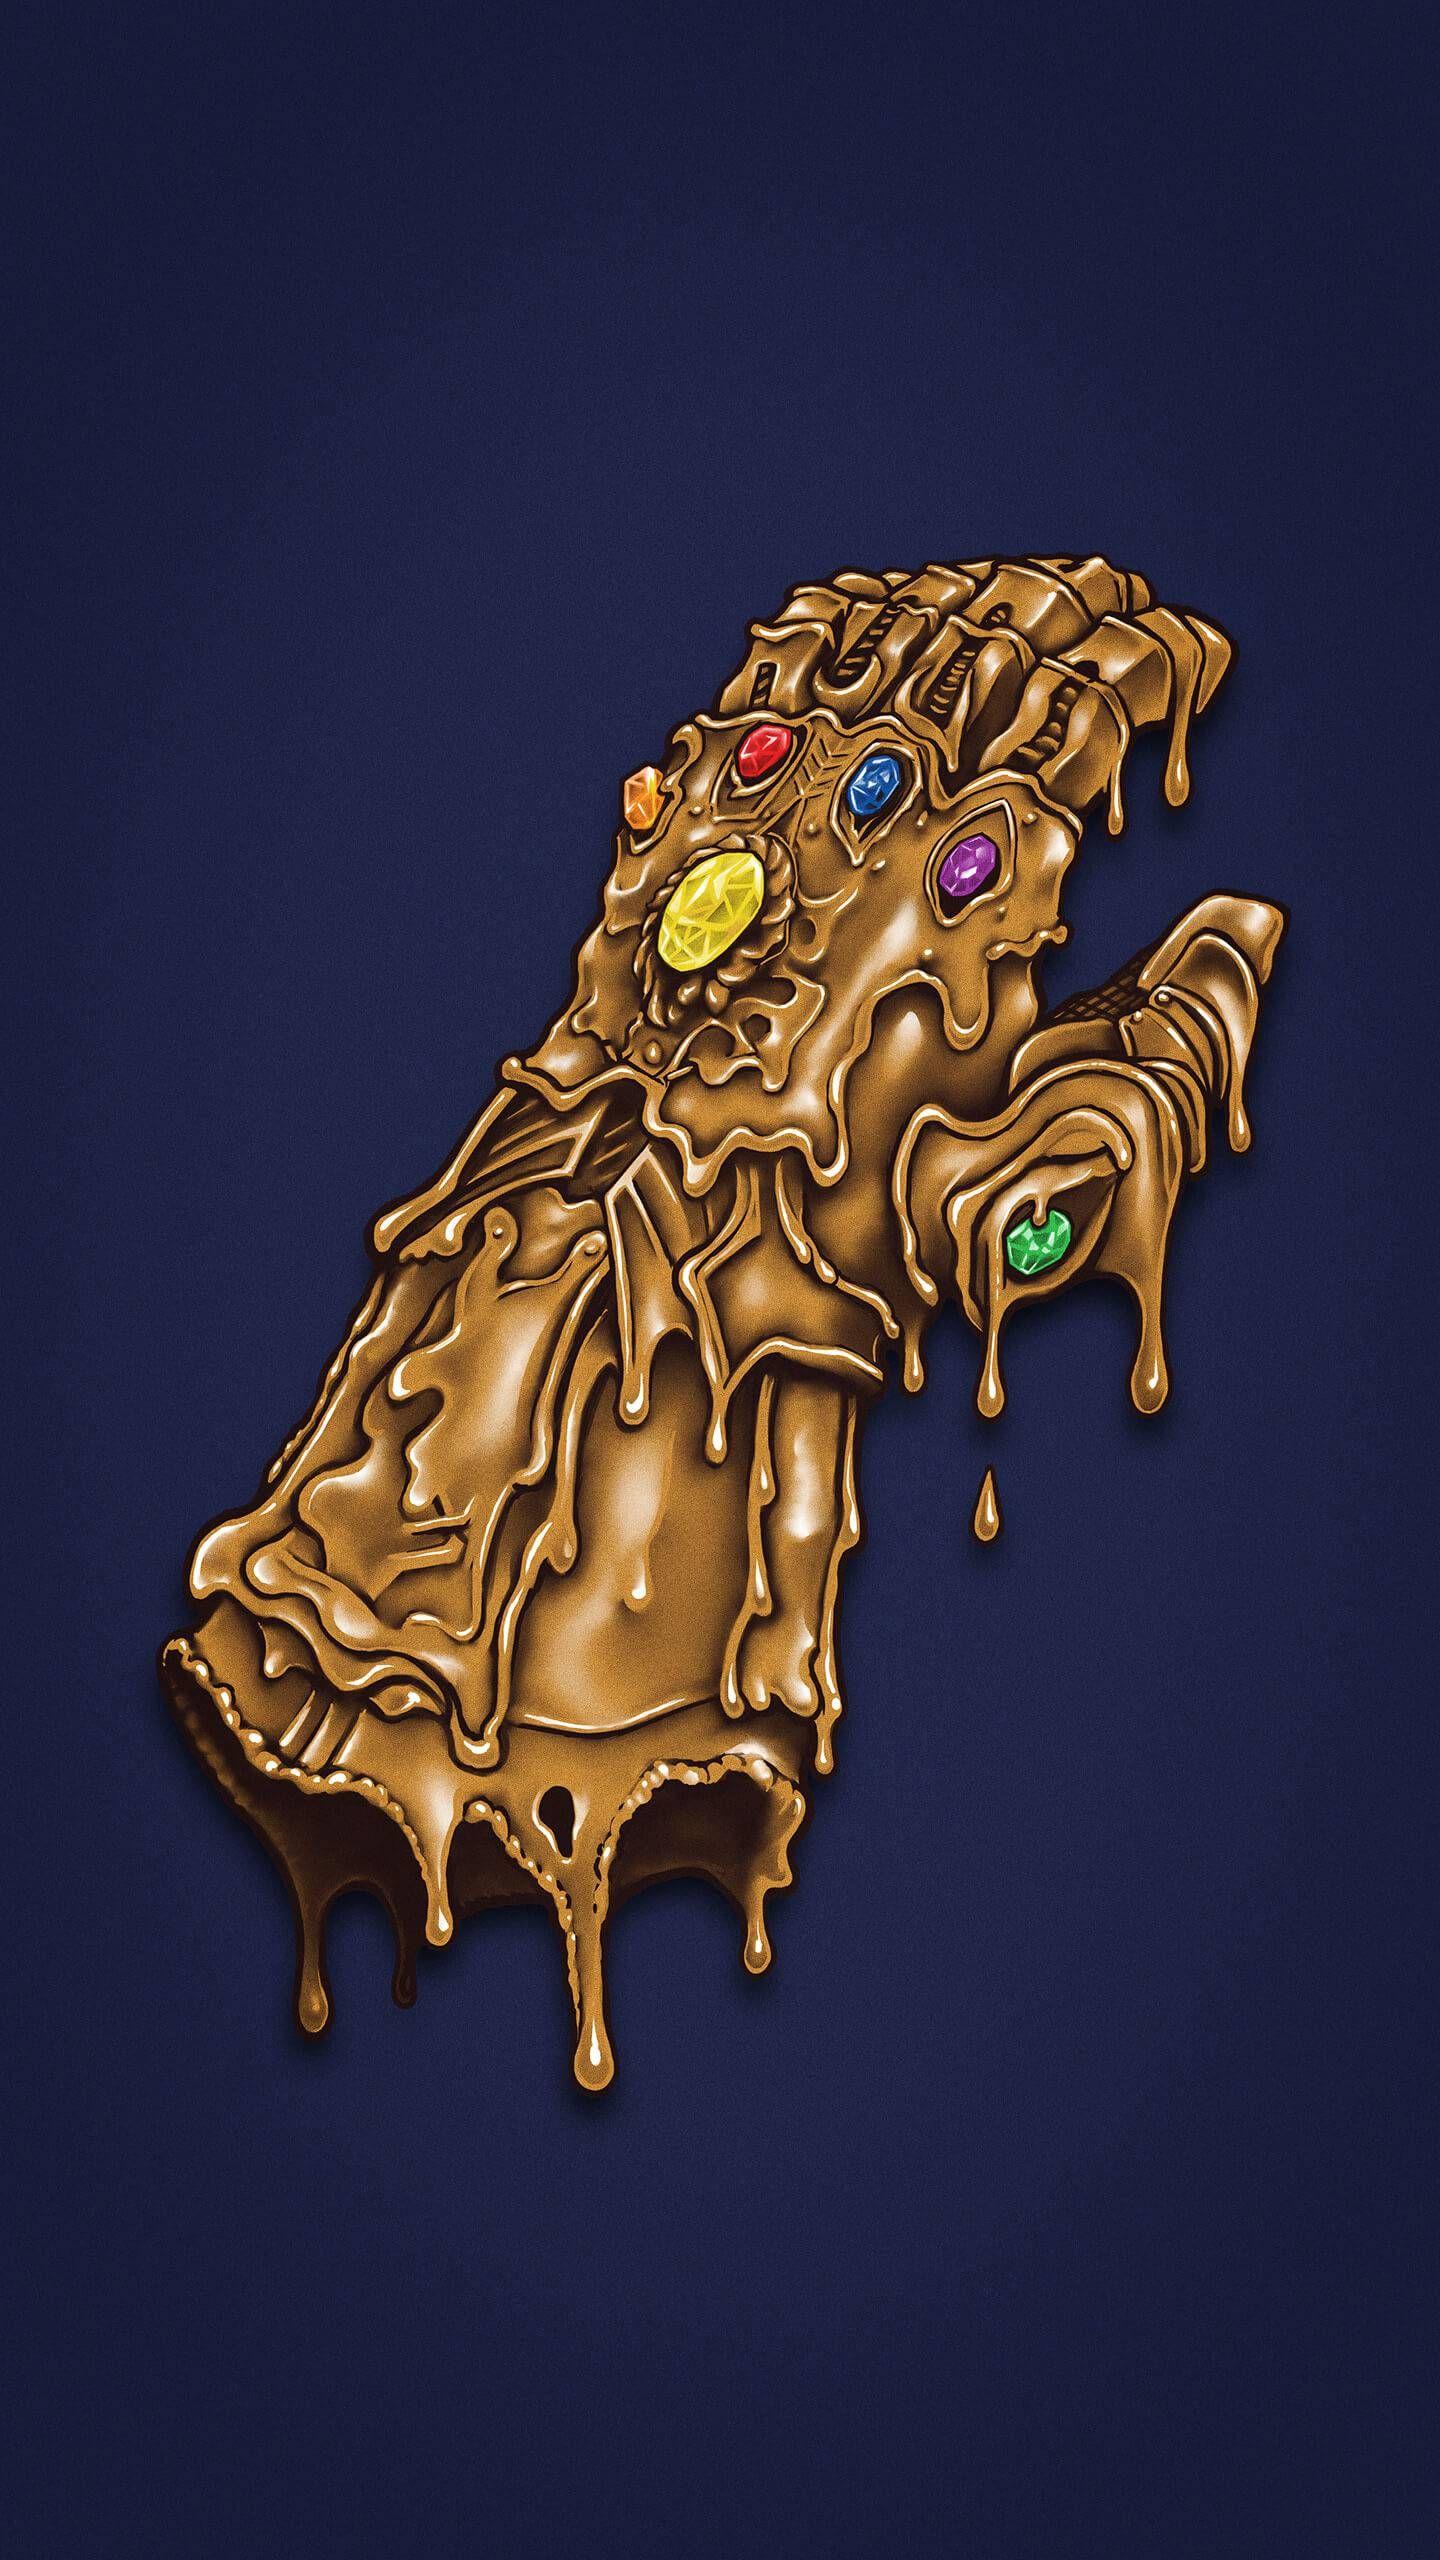 Melted infinity Gauntlet Avengers iPhone Wallpaper. Avengers wallpaper, Nerdy wallpaper, New york iphone wallpaper